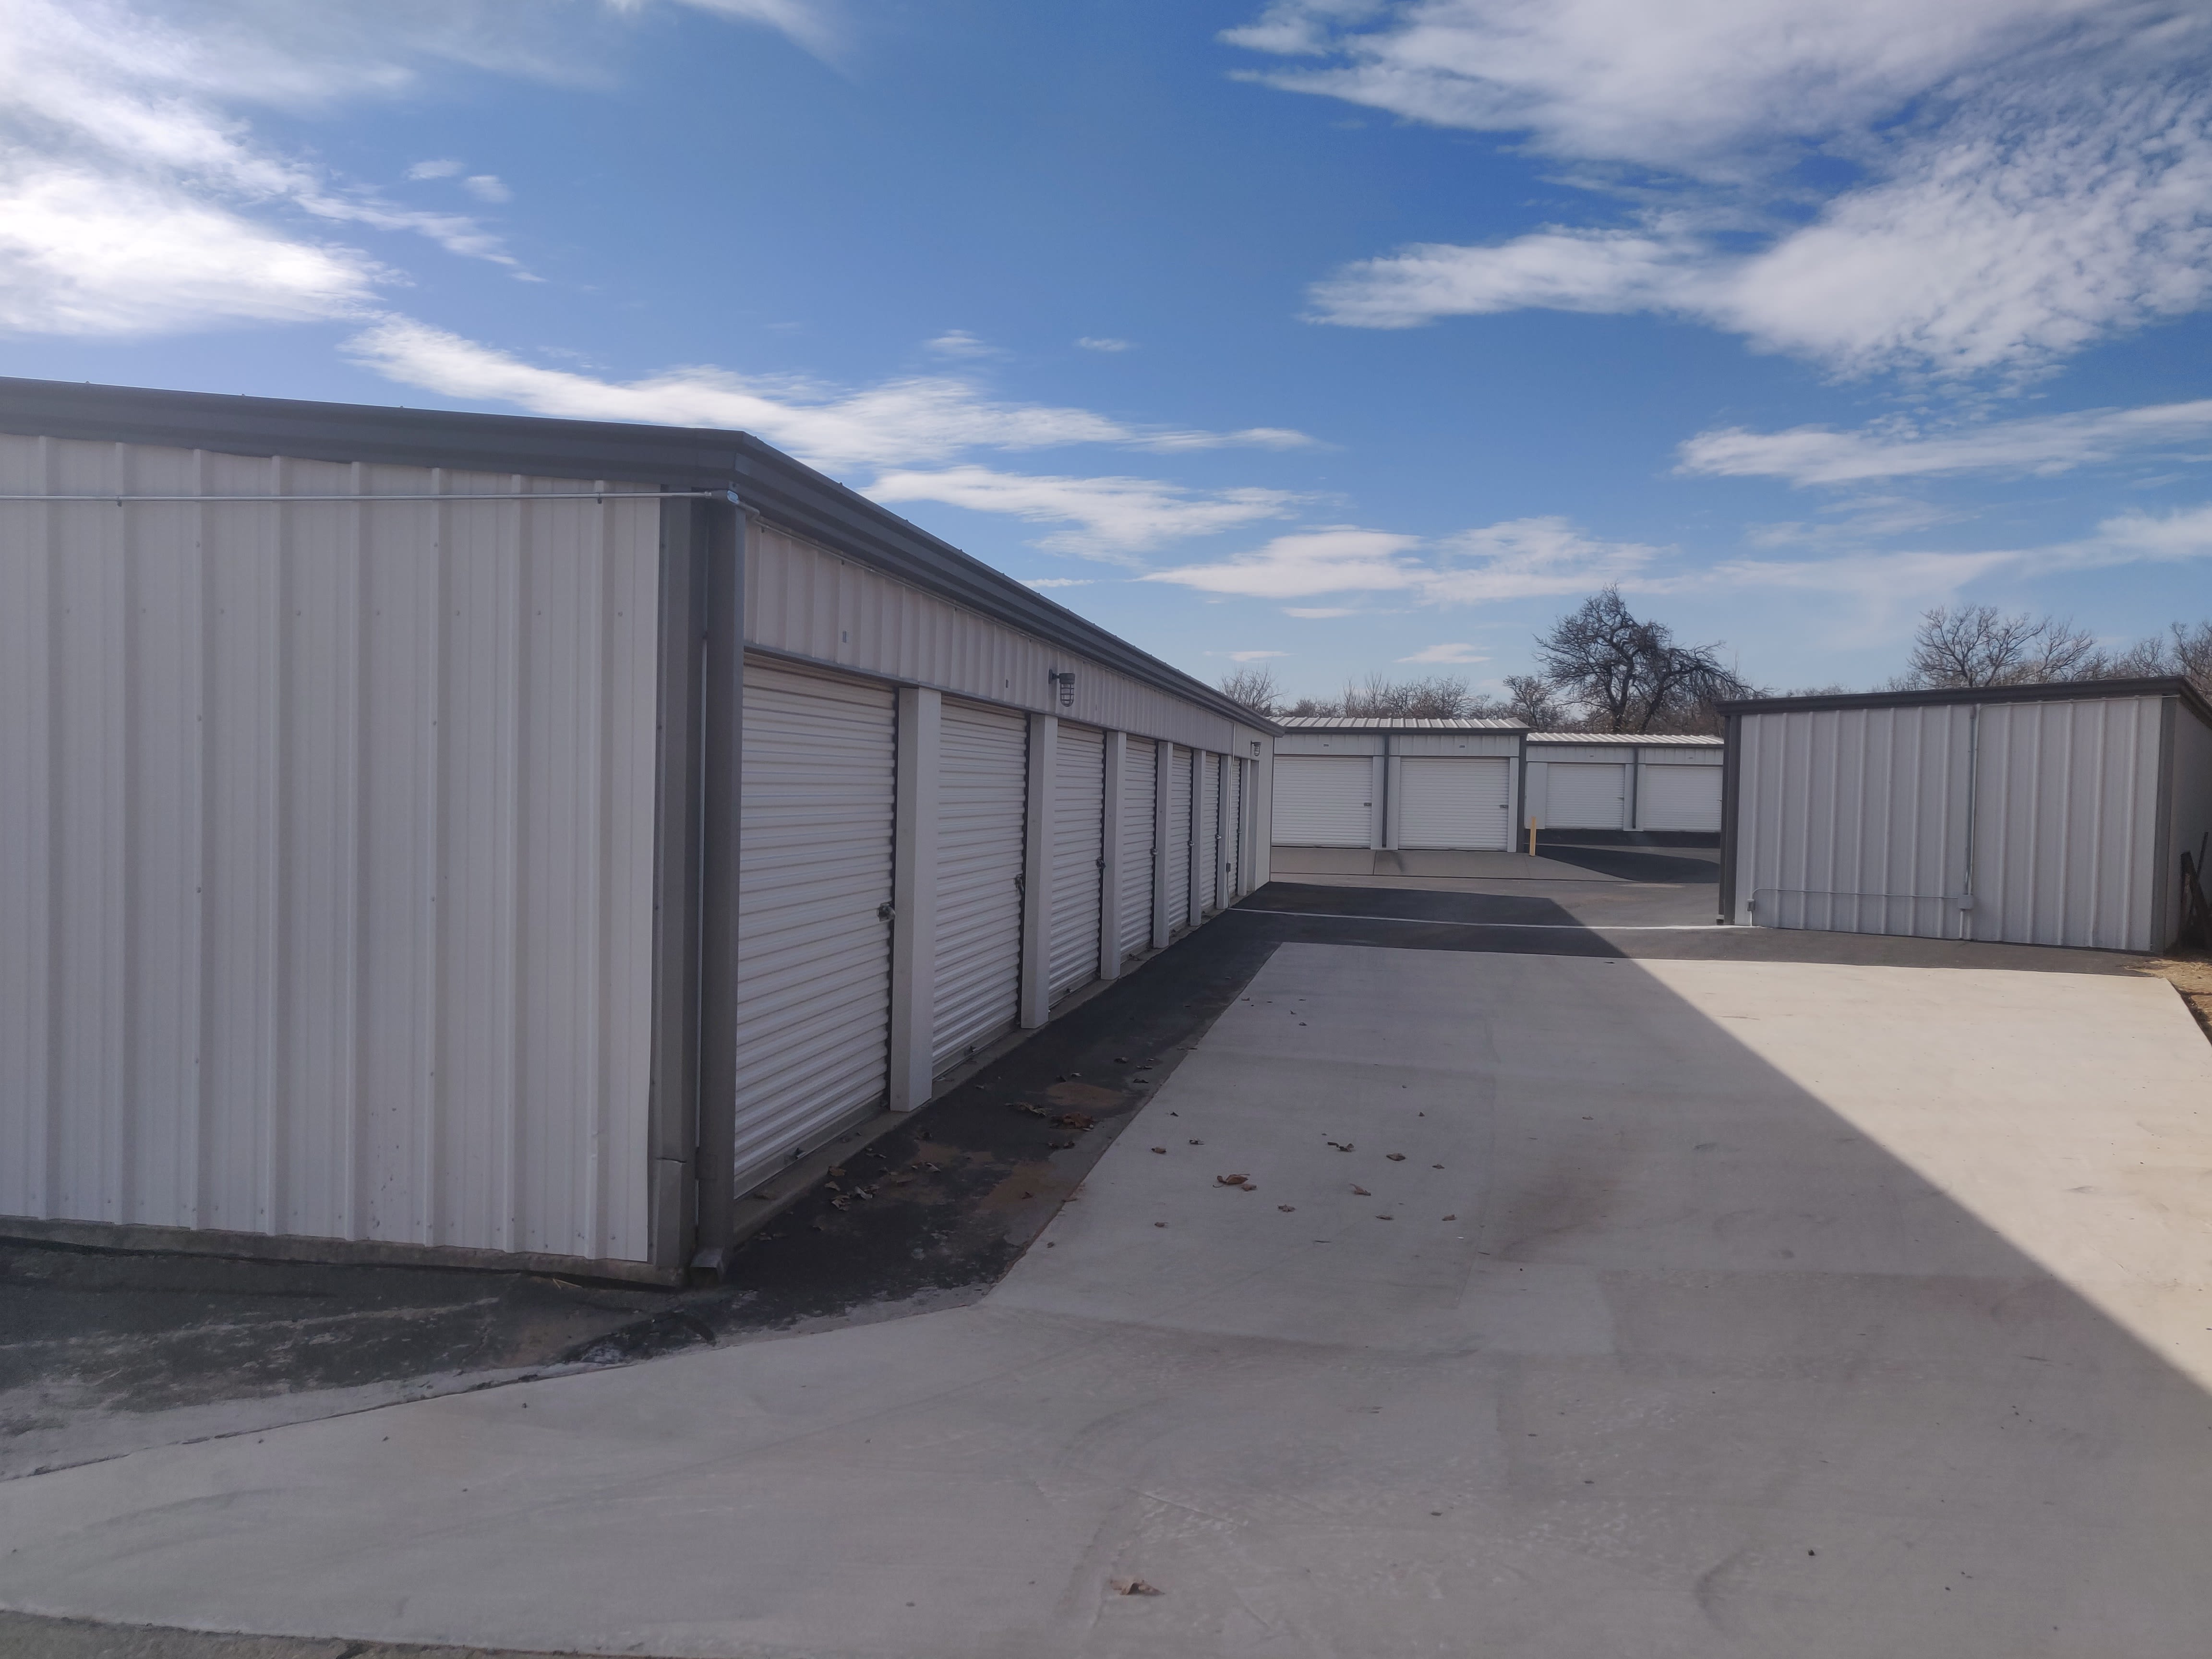 View our list of features at KO Storage in Jones, Oklahoma